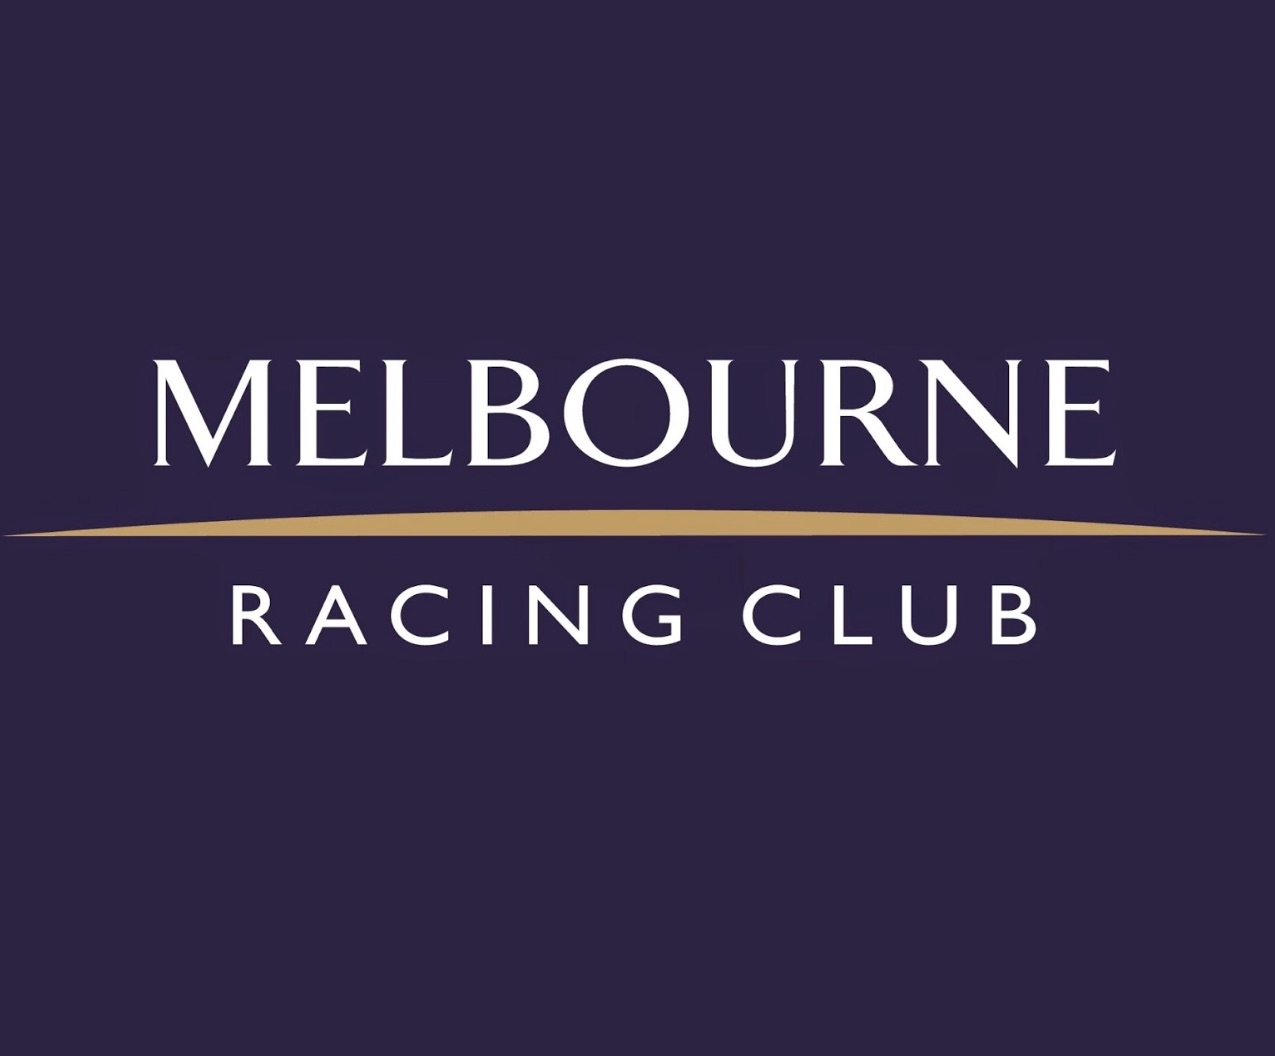 Melbourne Racing Club glowing testimonial for The Candy Buffet Company